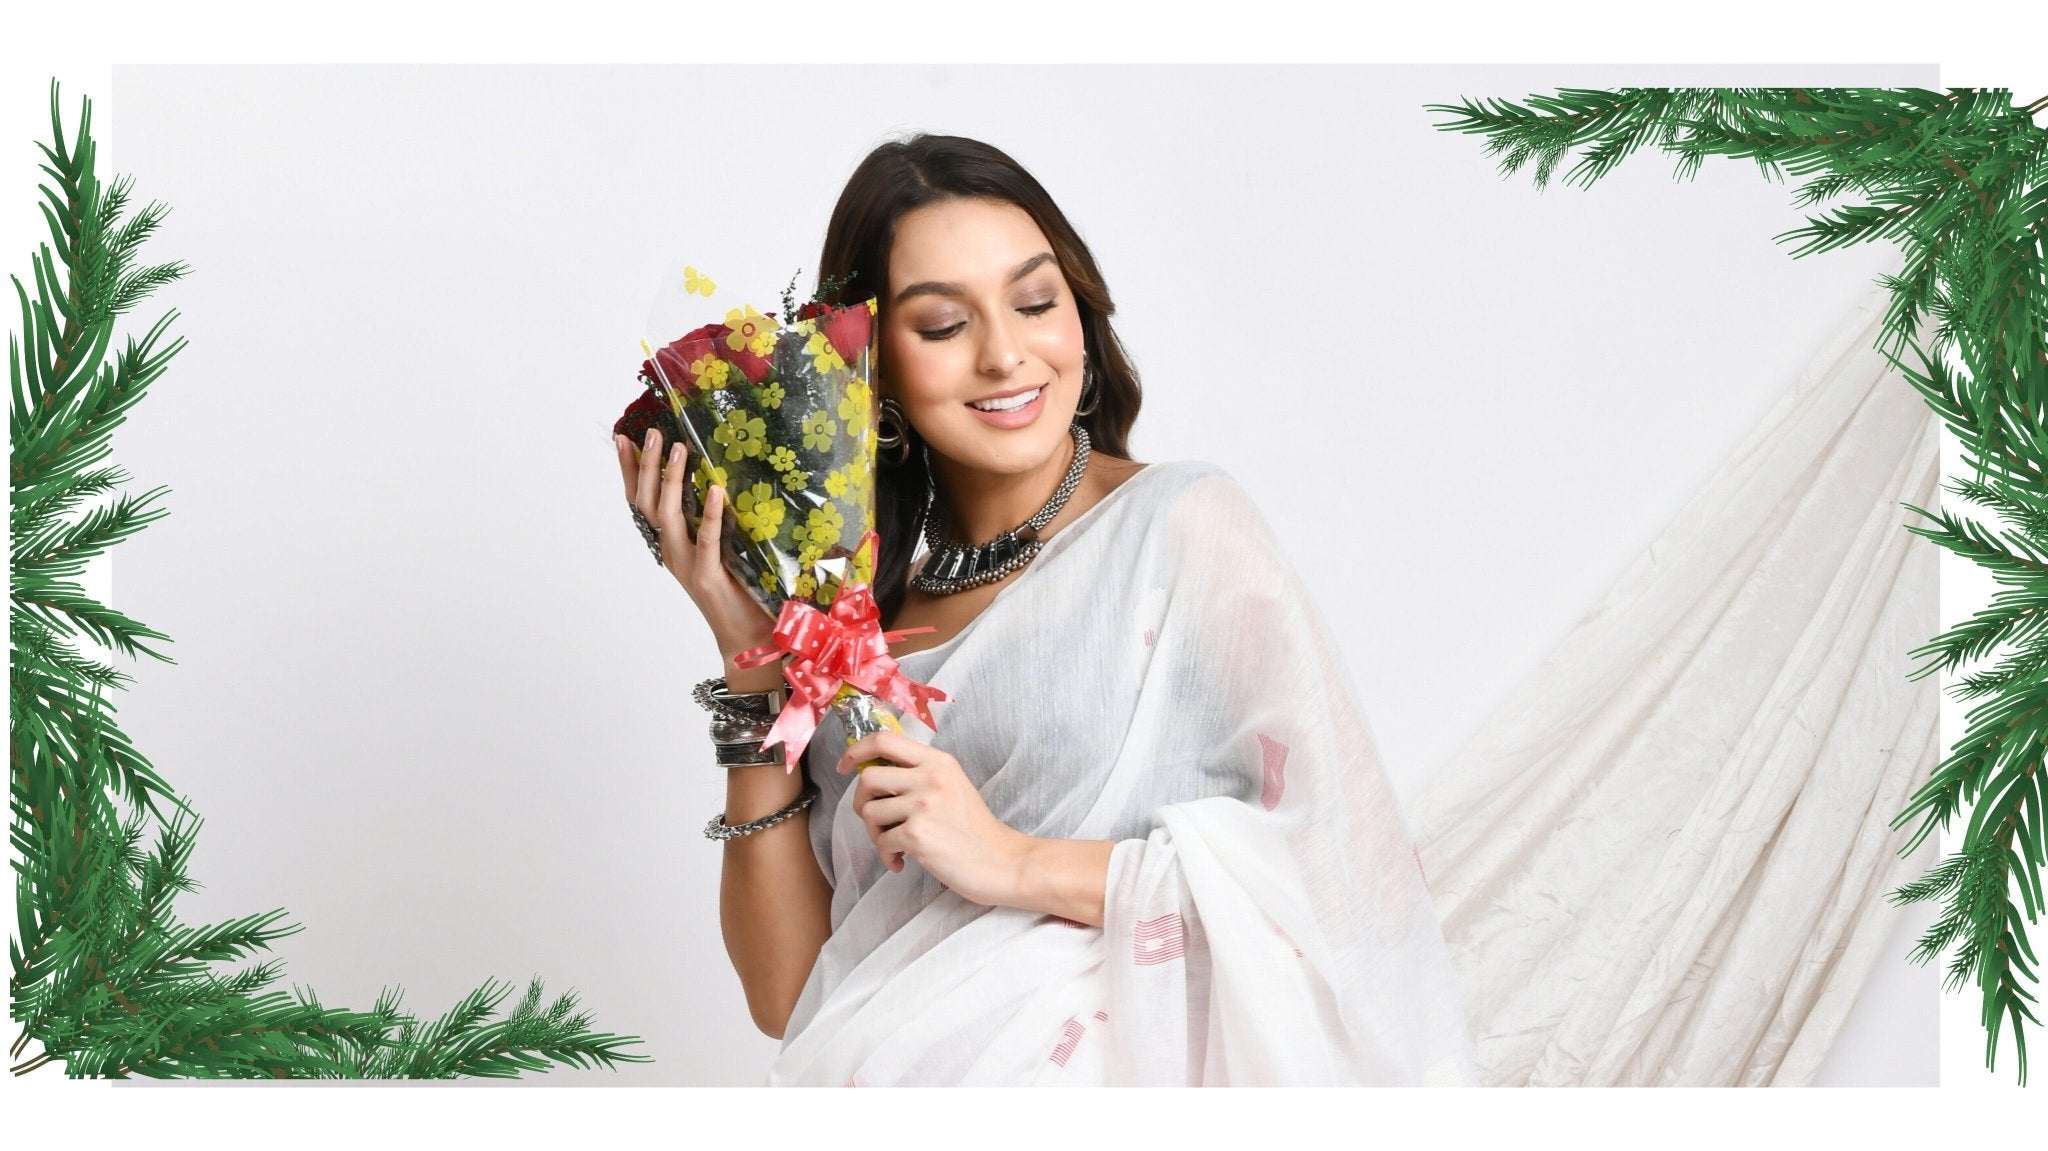 4 Unmatched Saree look for this Christmas